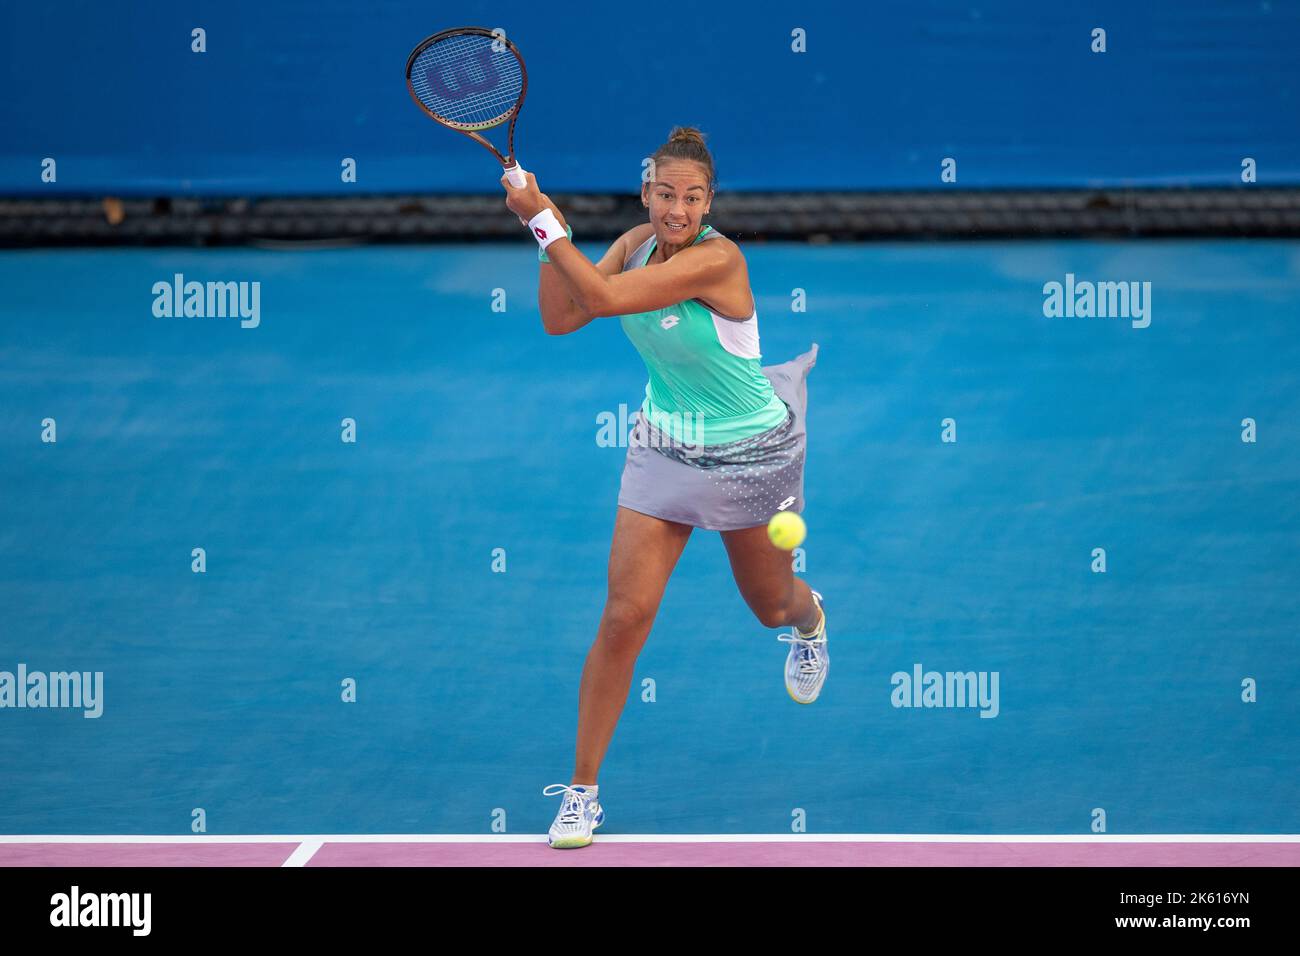 HUA HIN, THAILAND - OCTOBER 11:  Lesley Pattinama-Kerkhove from The Netherlands in the first round match against Mananchaya Sawangkaew of Thailand at the CAL-COMP & CCAU INDUSTRY 4.0 ITF TENNIS TOUR 2022 at True Arena Hua Hin on October 11, 2022 in HUA HIN, THAILAND (Photo by Peter van der Klooster/Alamy Live News) Stock Photo